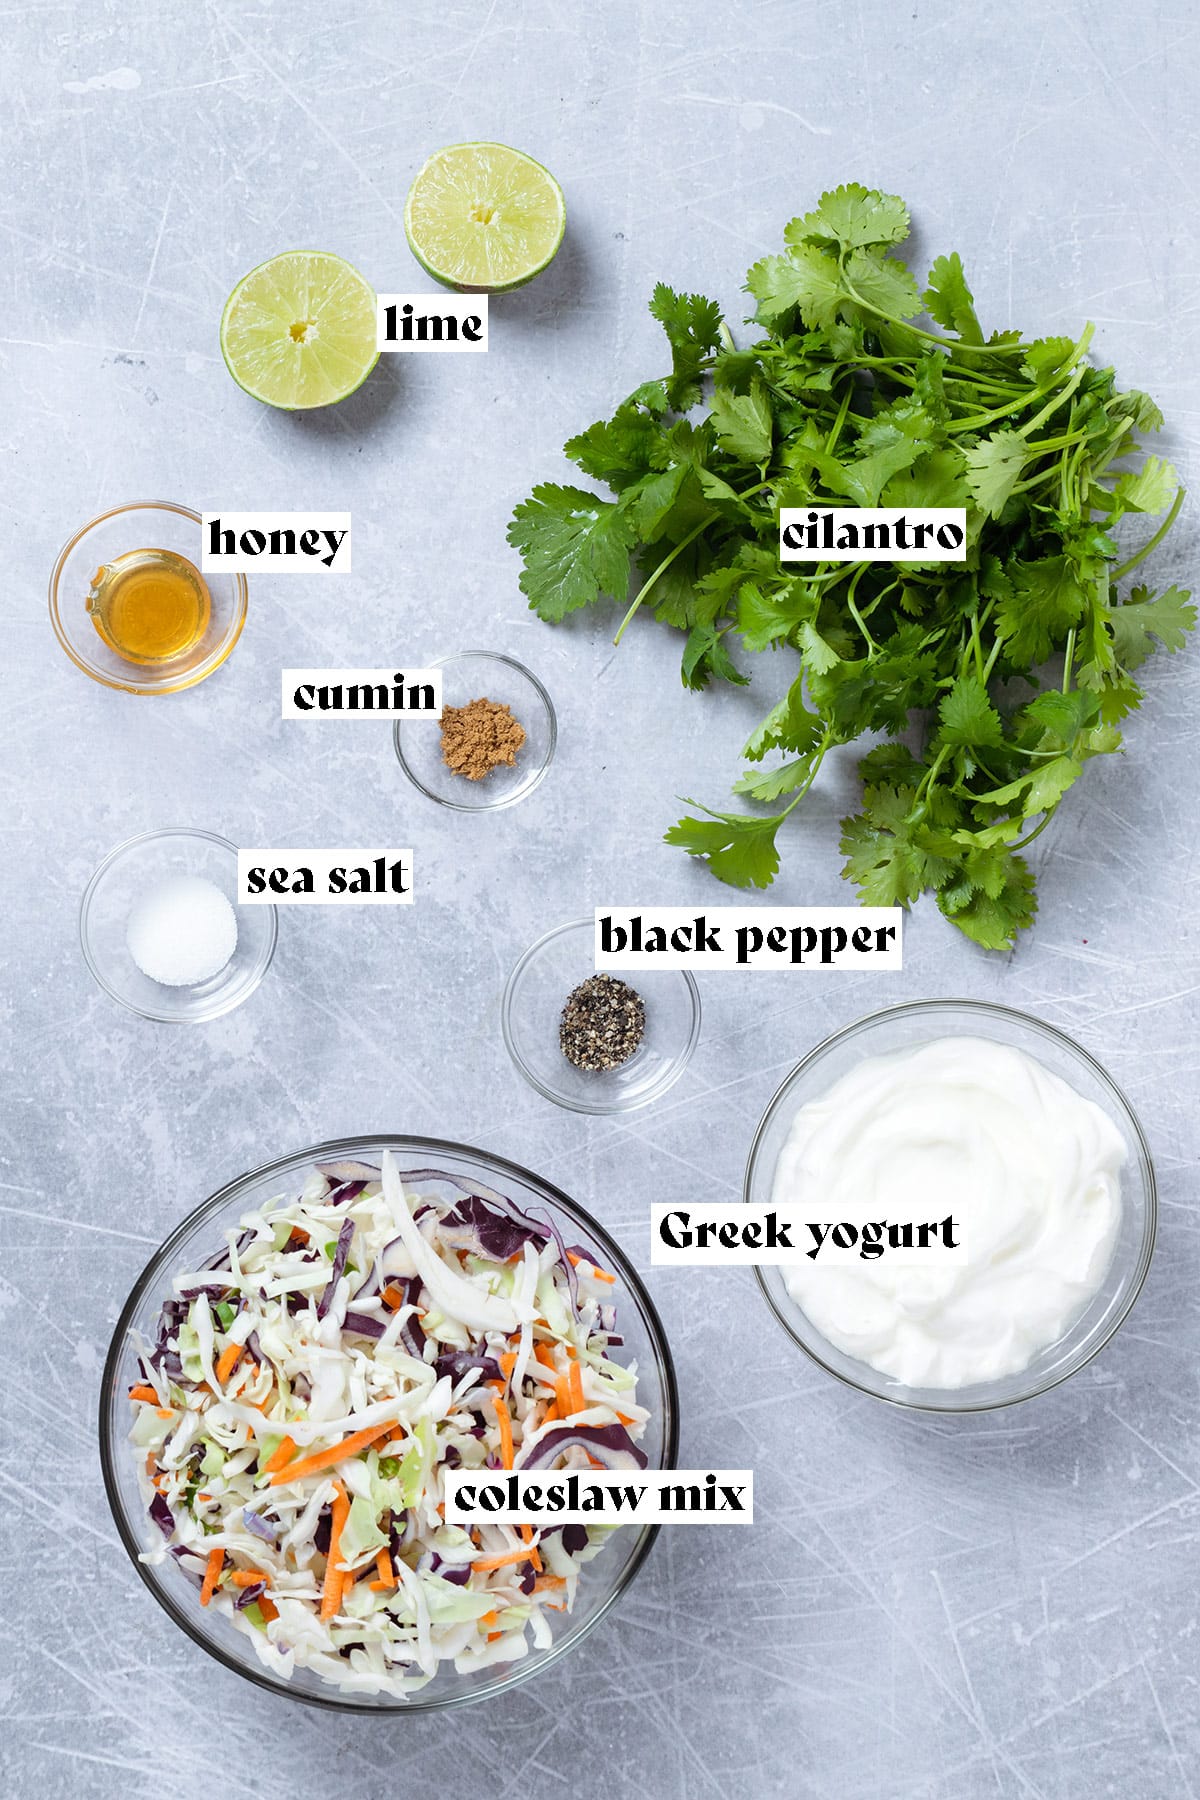 Cilantro, coleslaw mix, greek yogurt, and other ingredients laid out on a grey background.